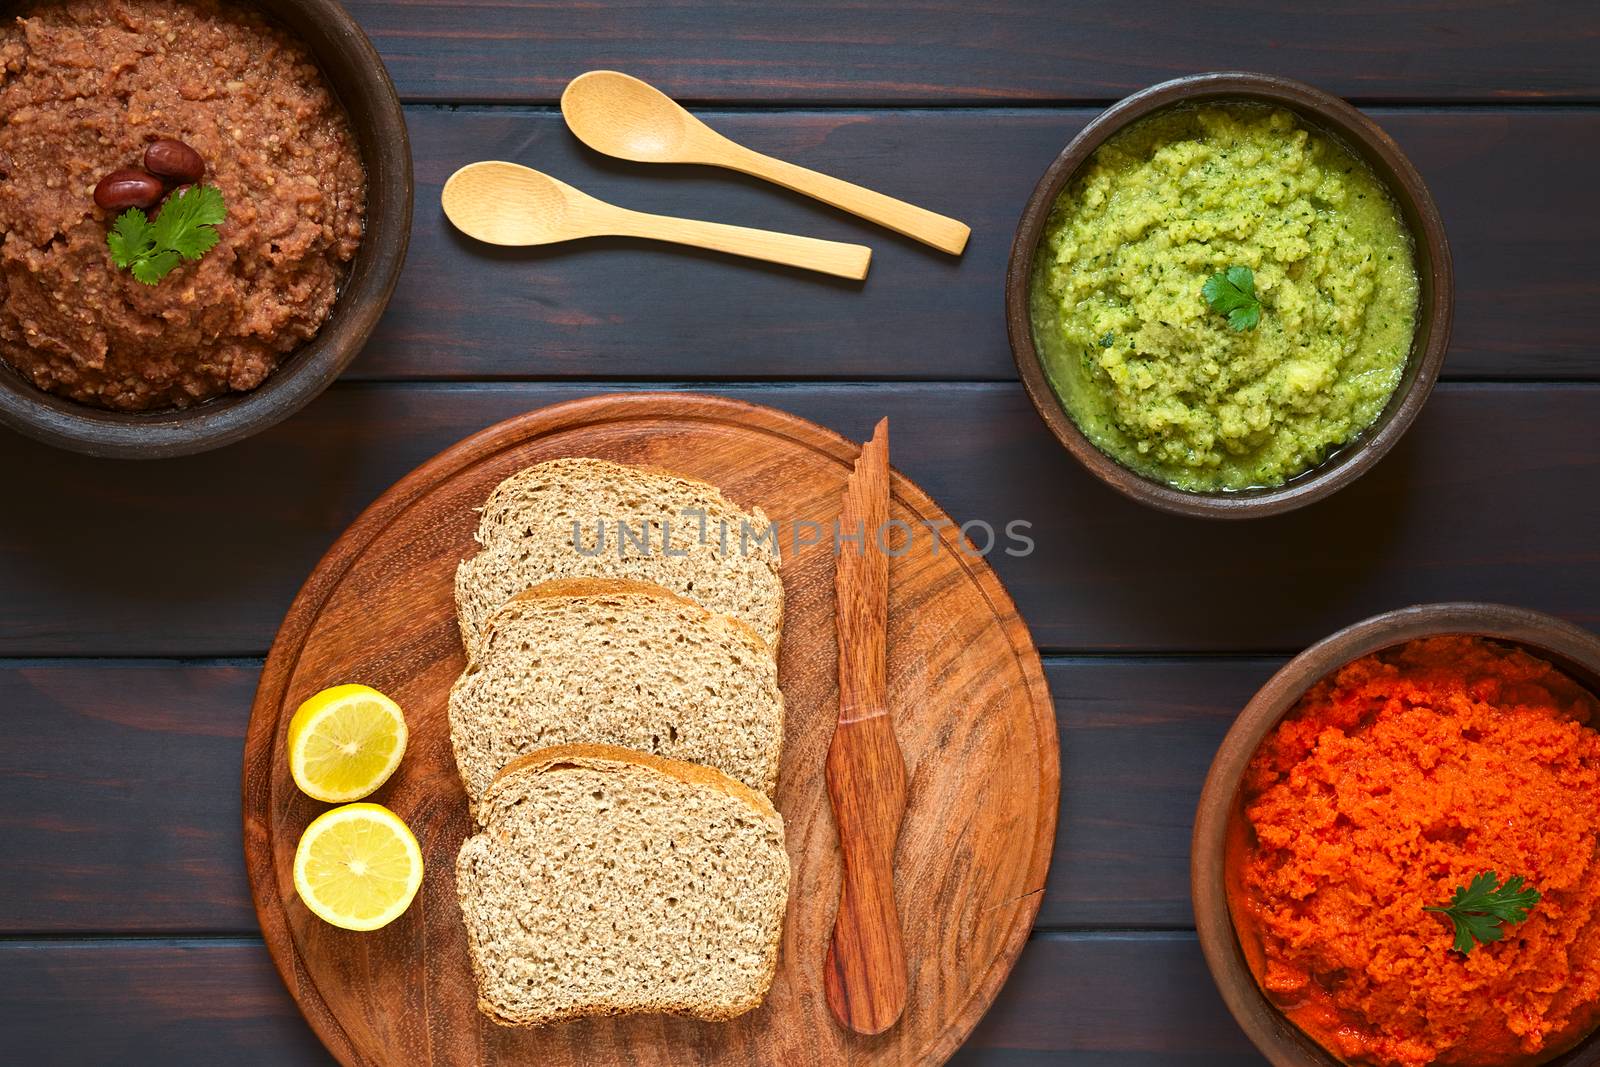 Wholegrain Bread with Vegetable Spreads by ildi